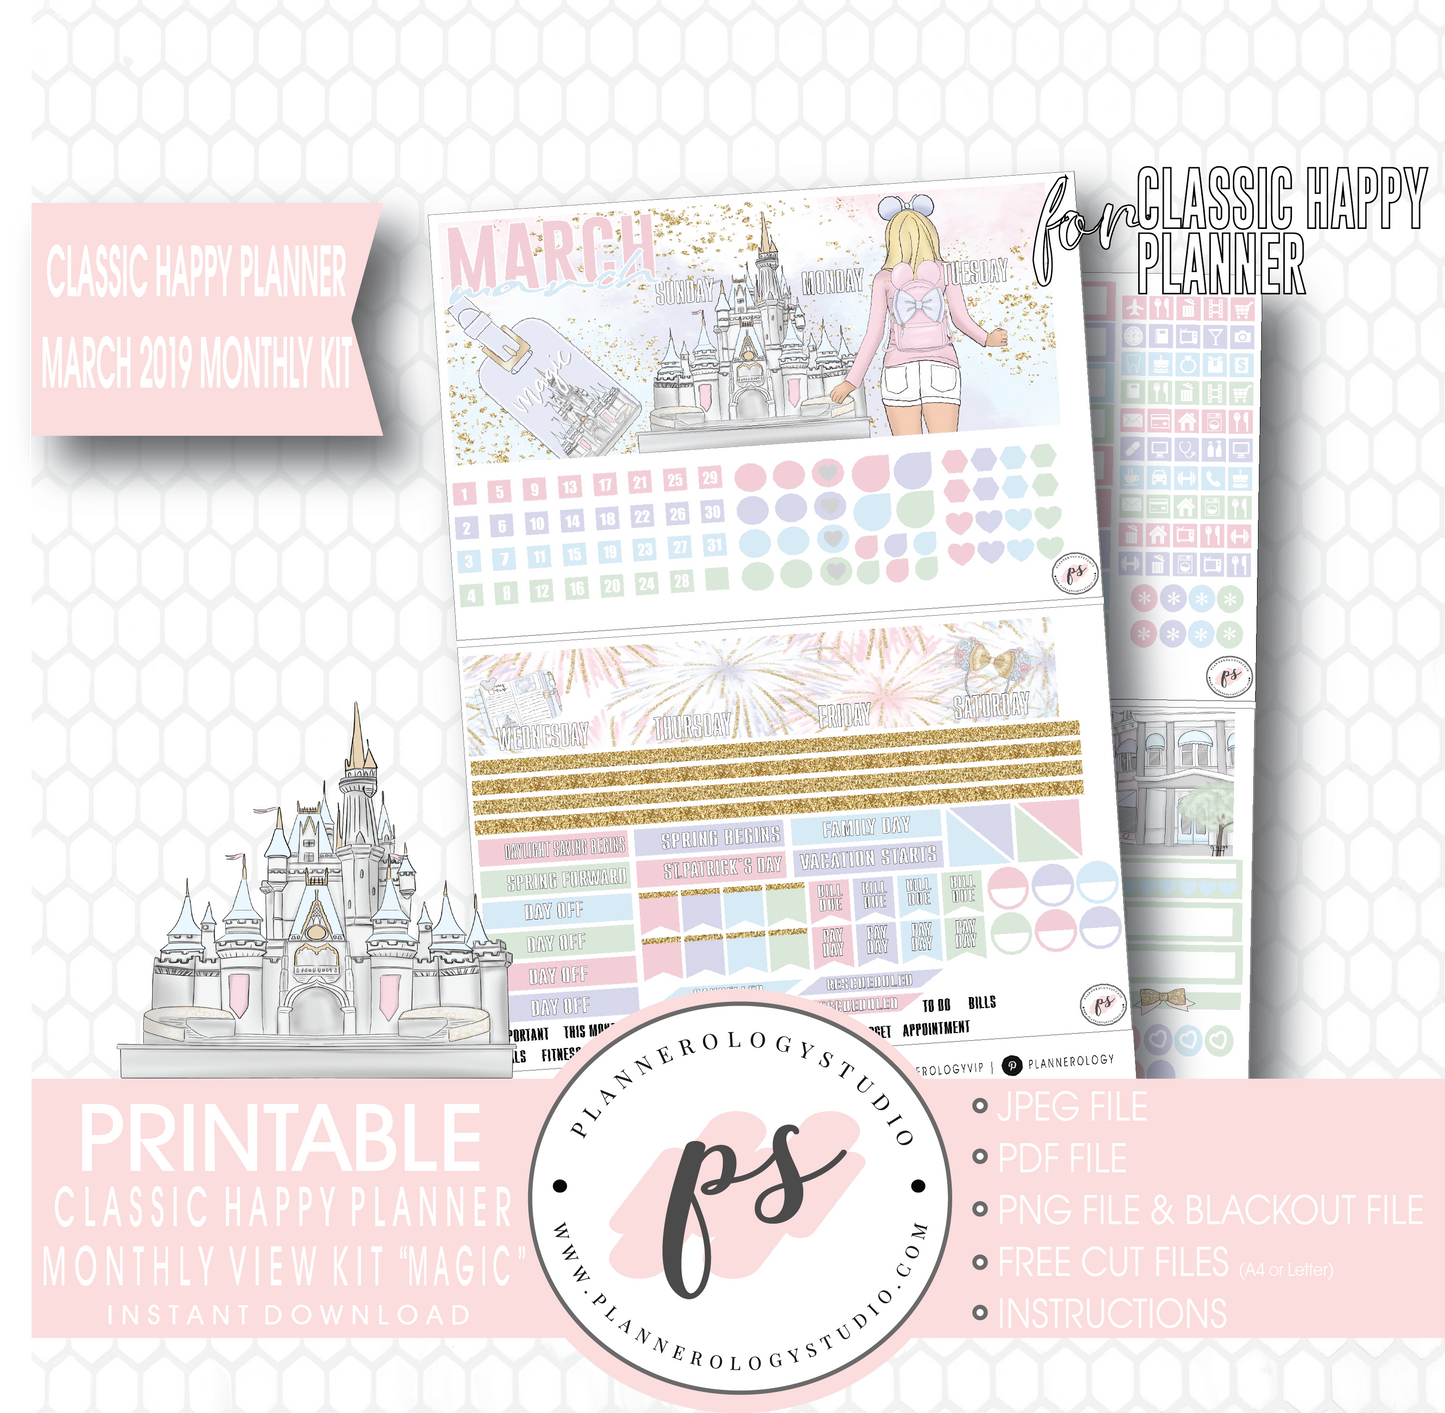 Magic (Disney Inspired) March 2019 Monthly View Kit Digital Printable Planner Stickers (for use with Classic Happy Planner) (Undated) - Plannerologystudio